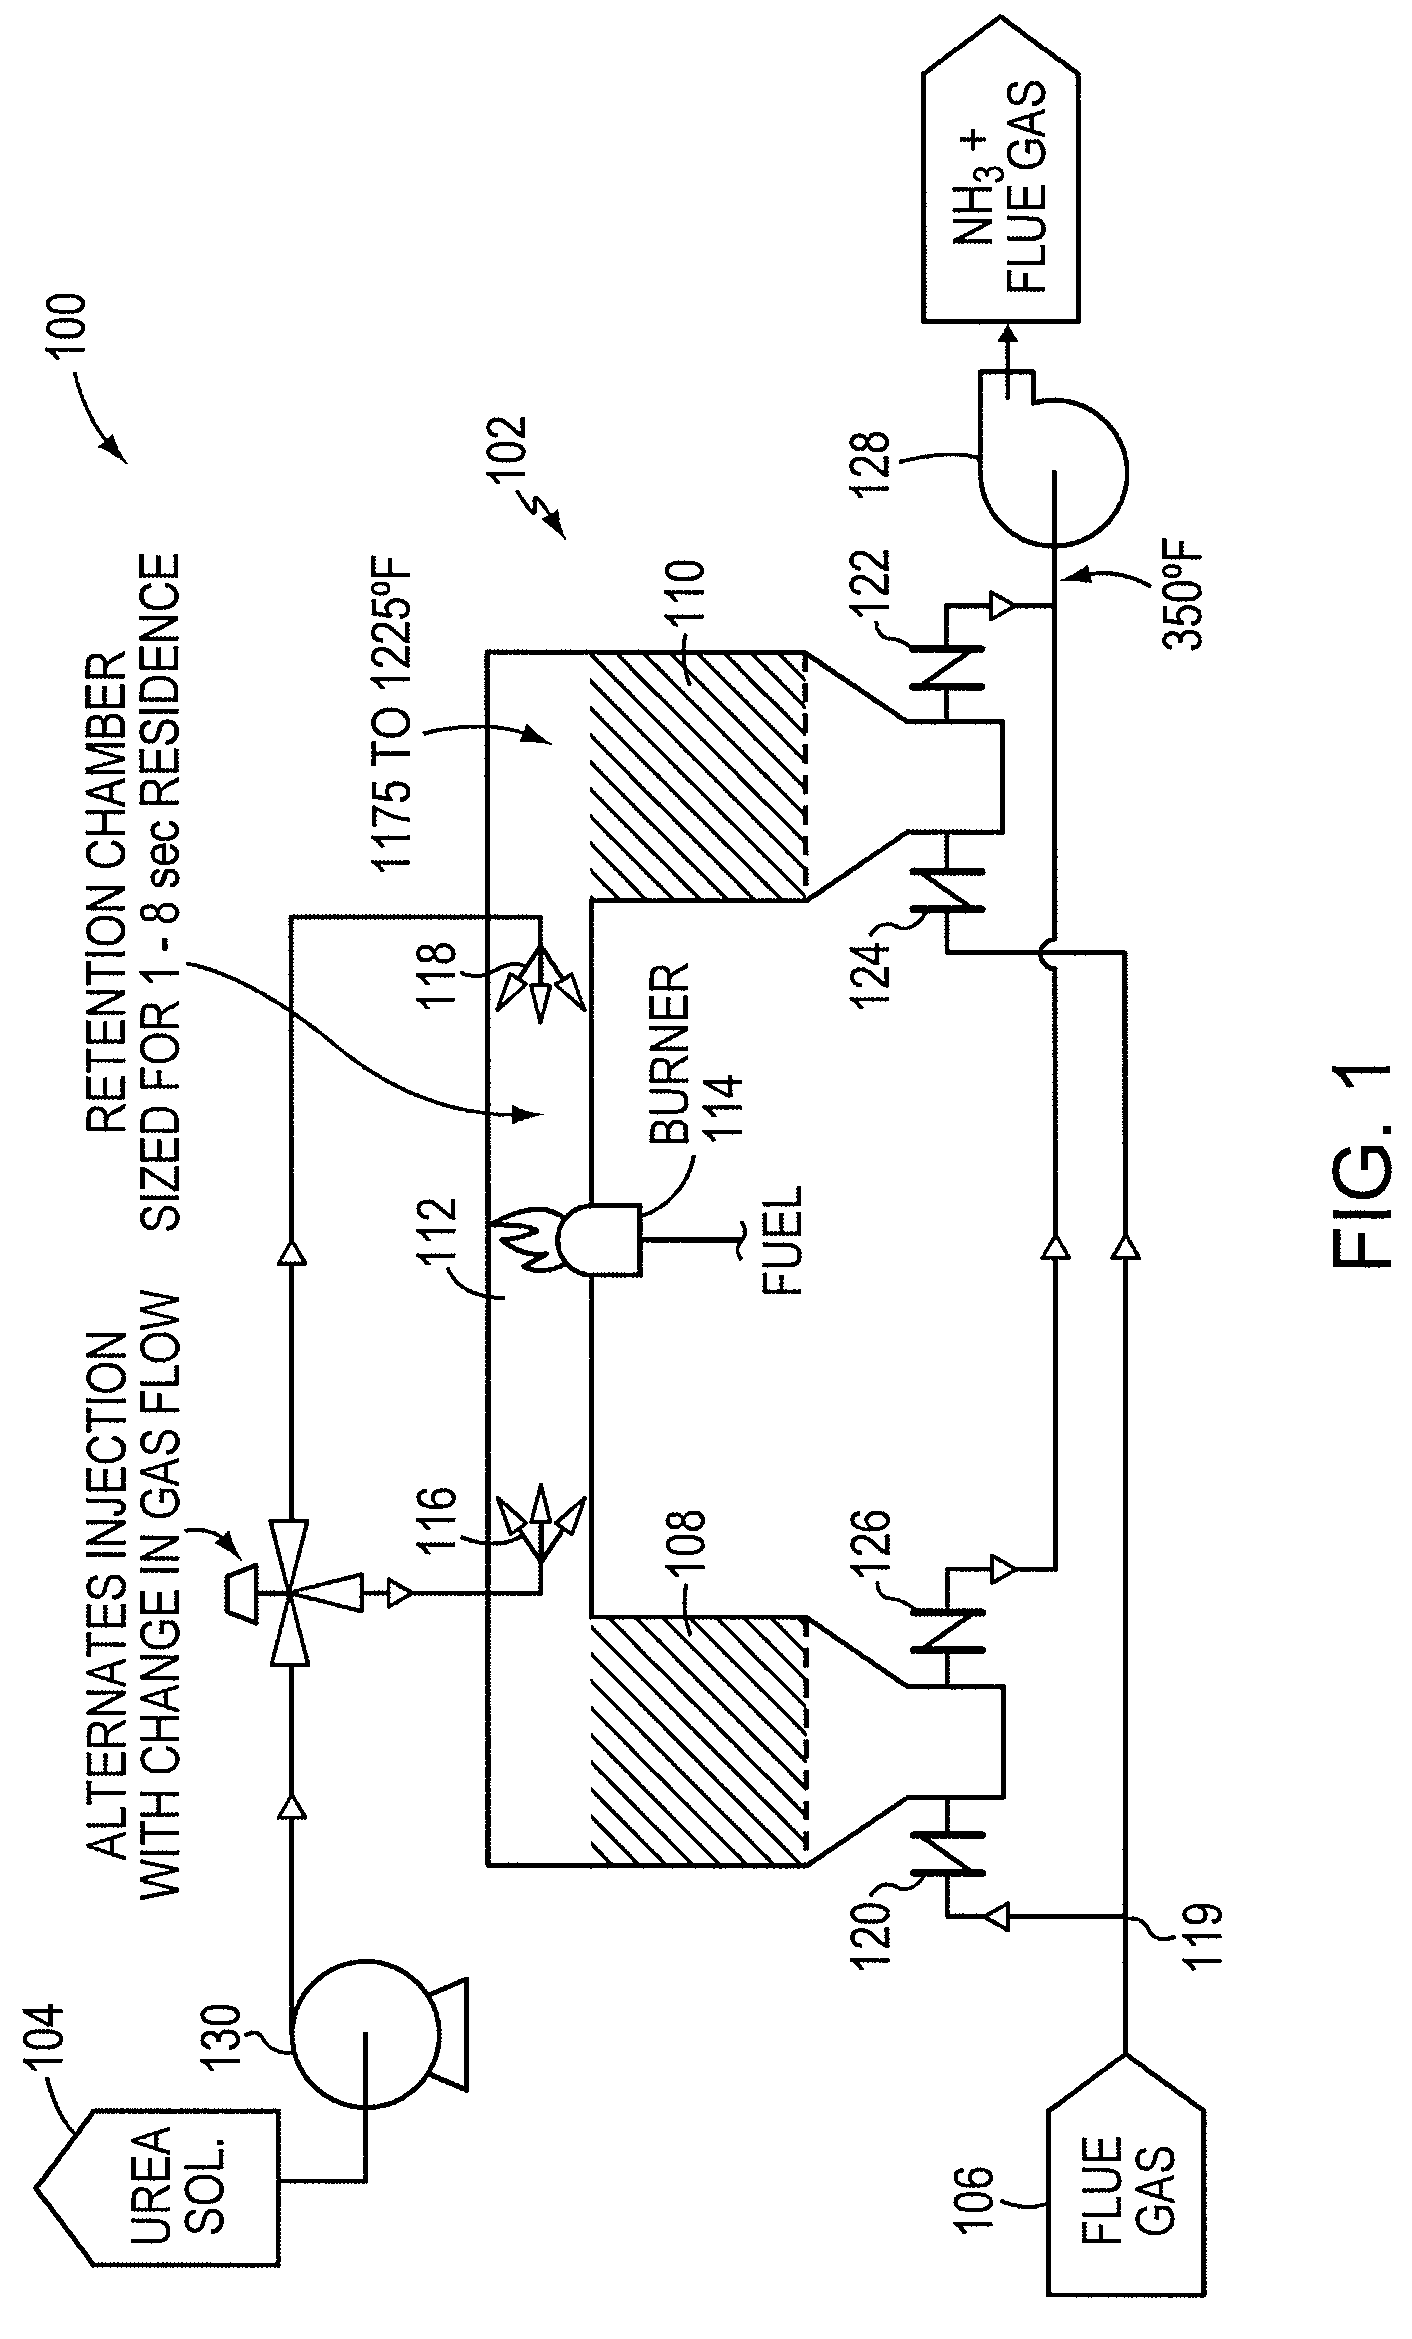 Thermal decomposition of urea in a side stream of combustion flue gas using a regenerative heat exchanger